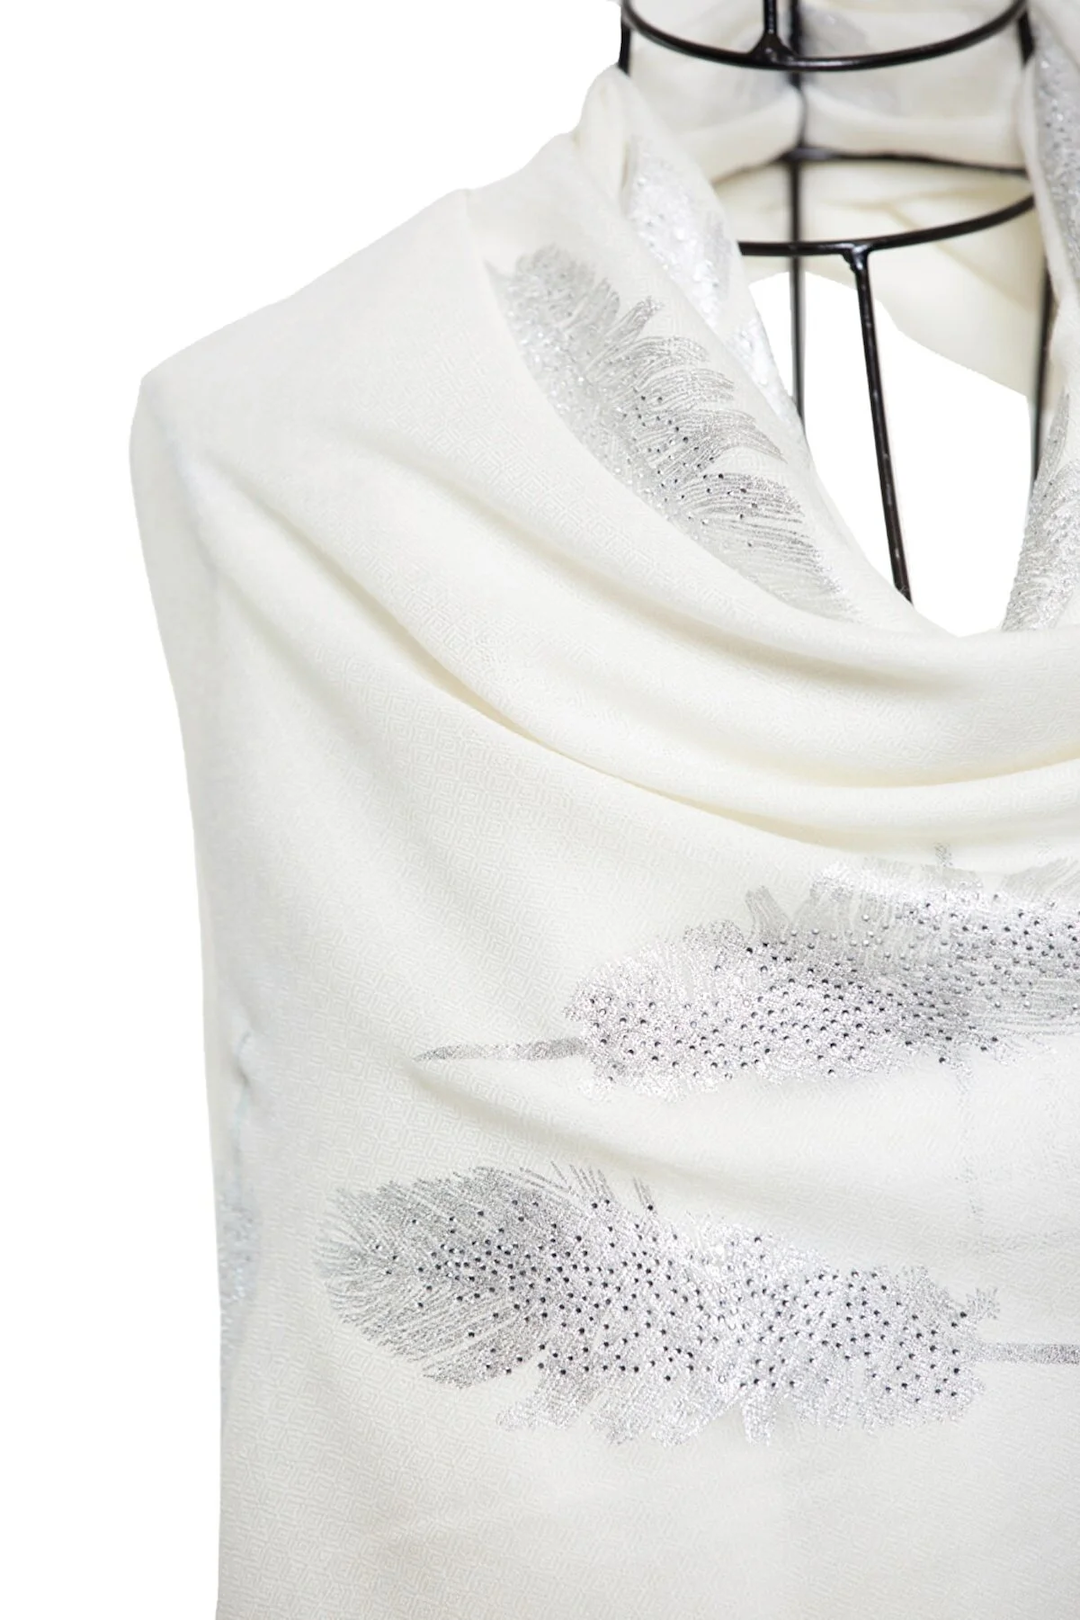 Angel Feathers Crystal Feathers Shawl Stole - Ivory Silver